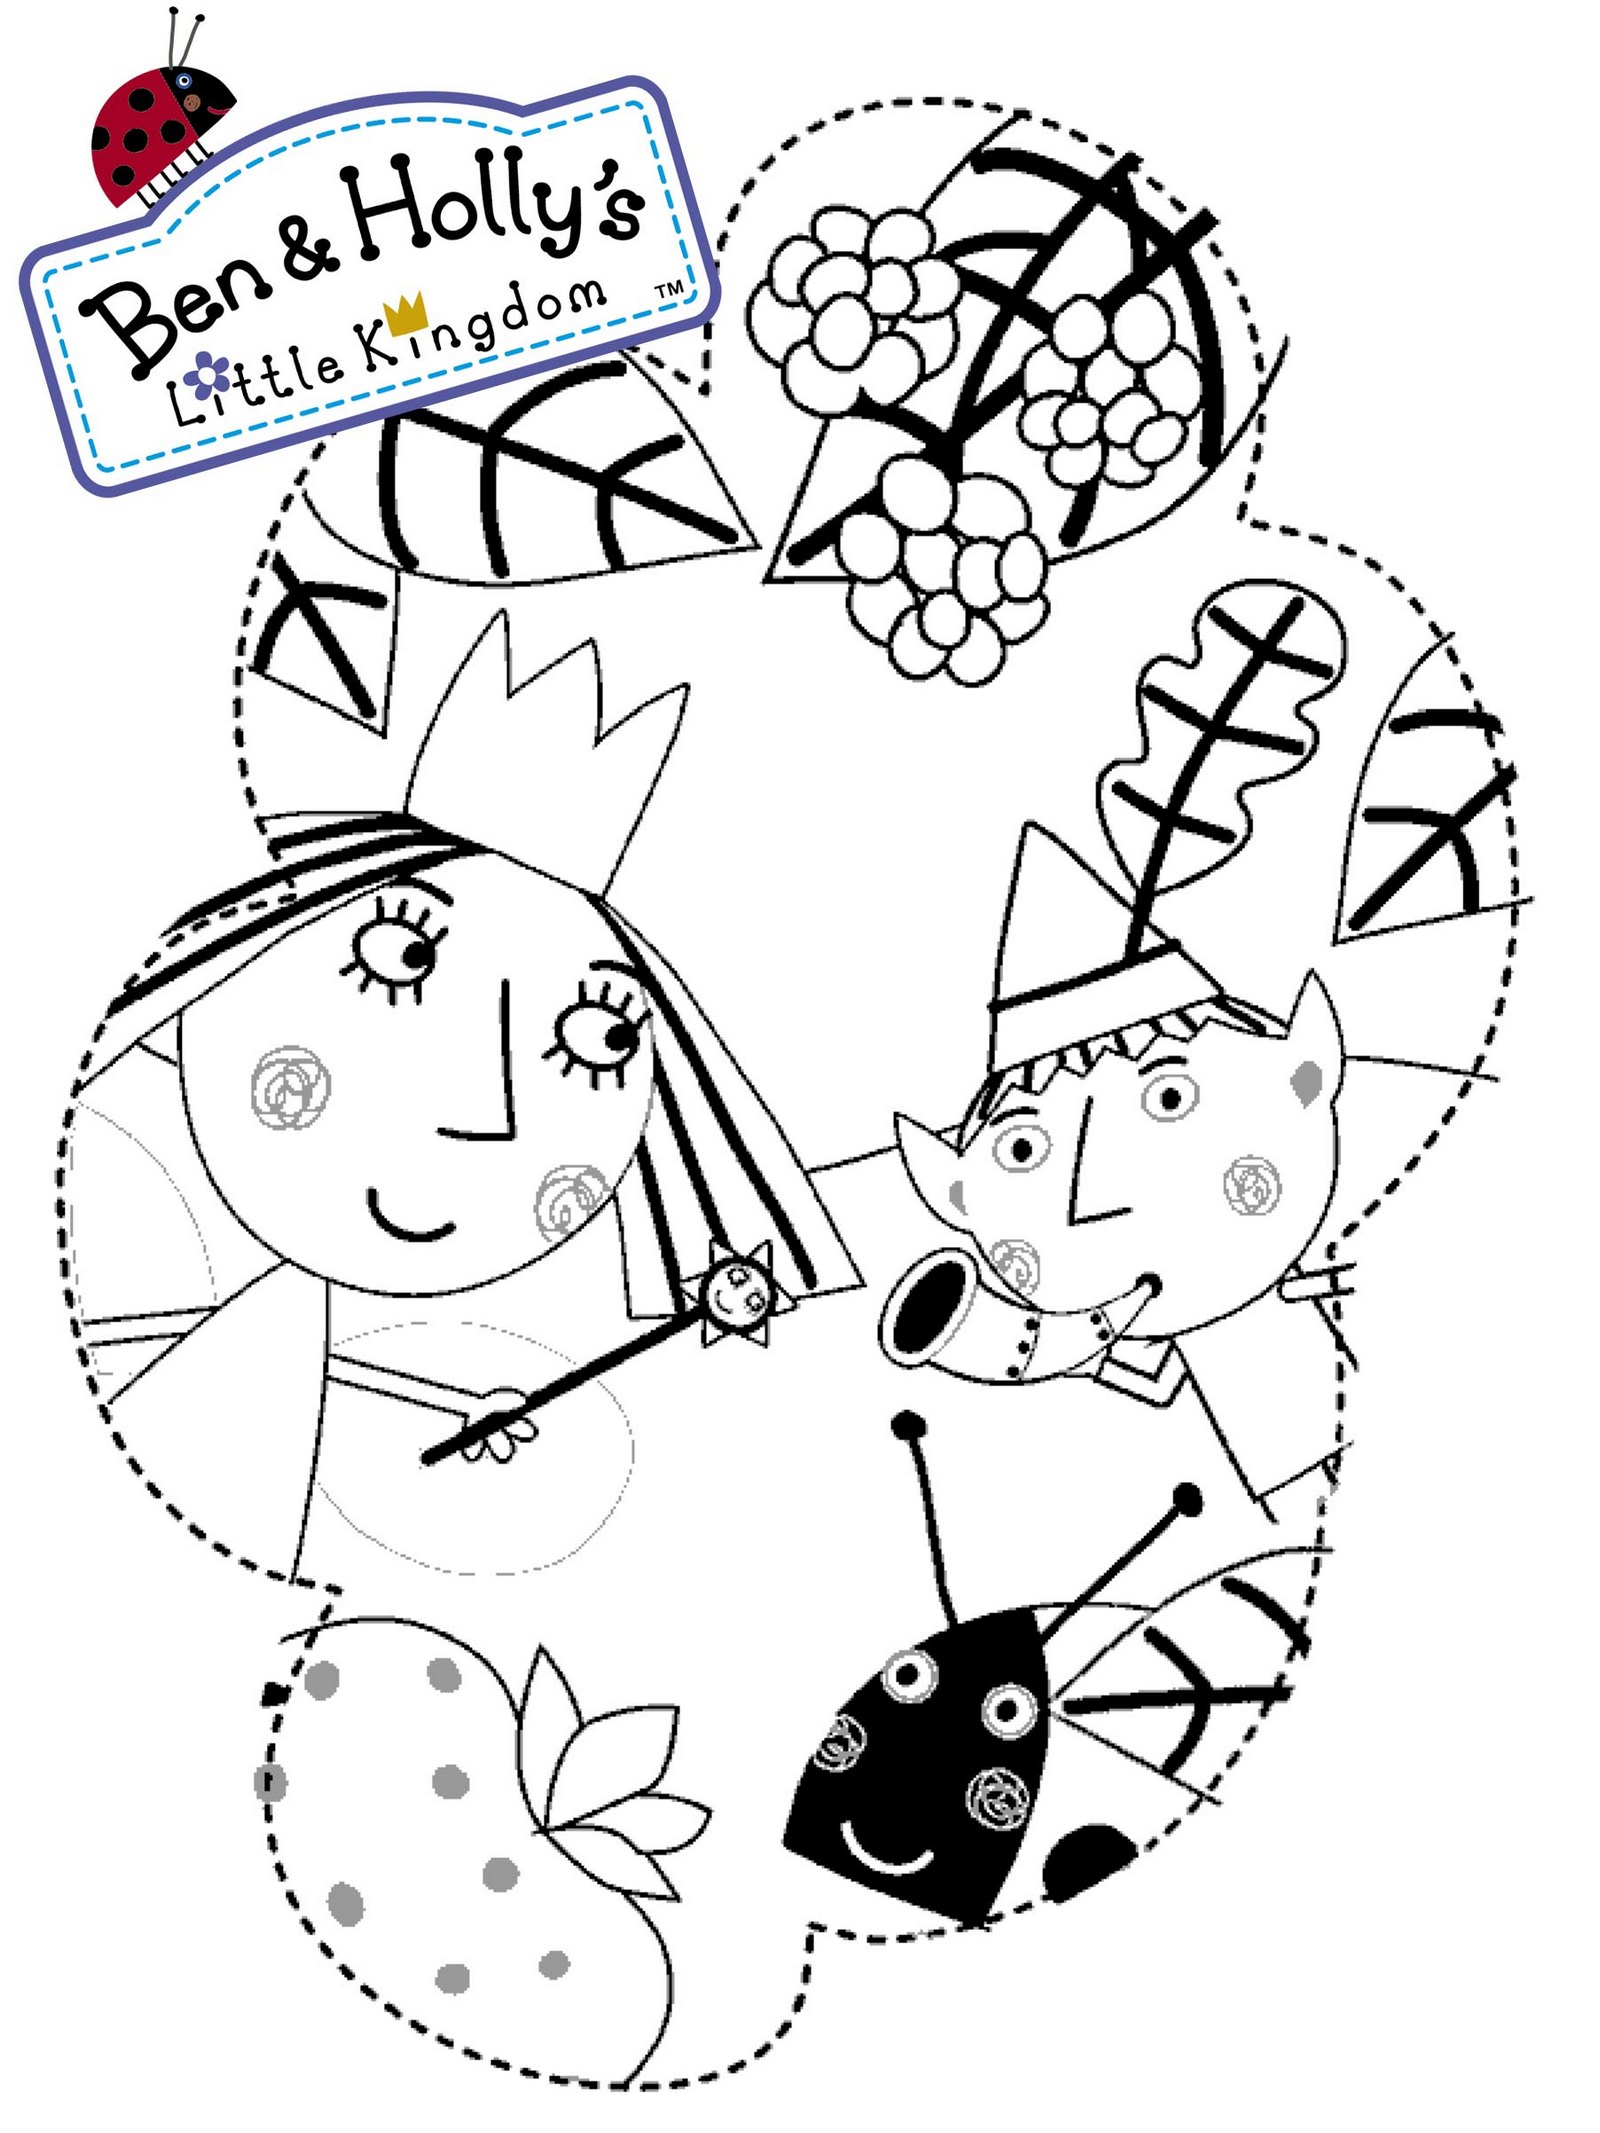 Ben Elf and Princess Holly Coloring Page